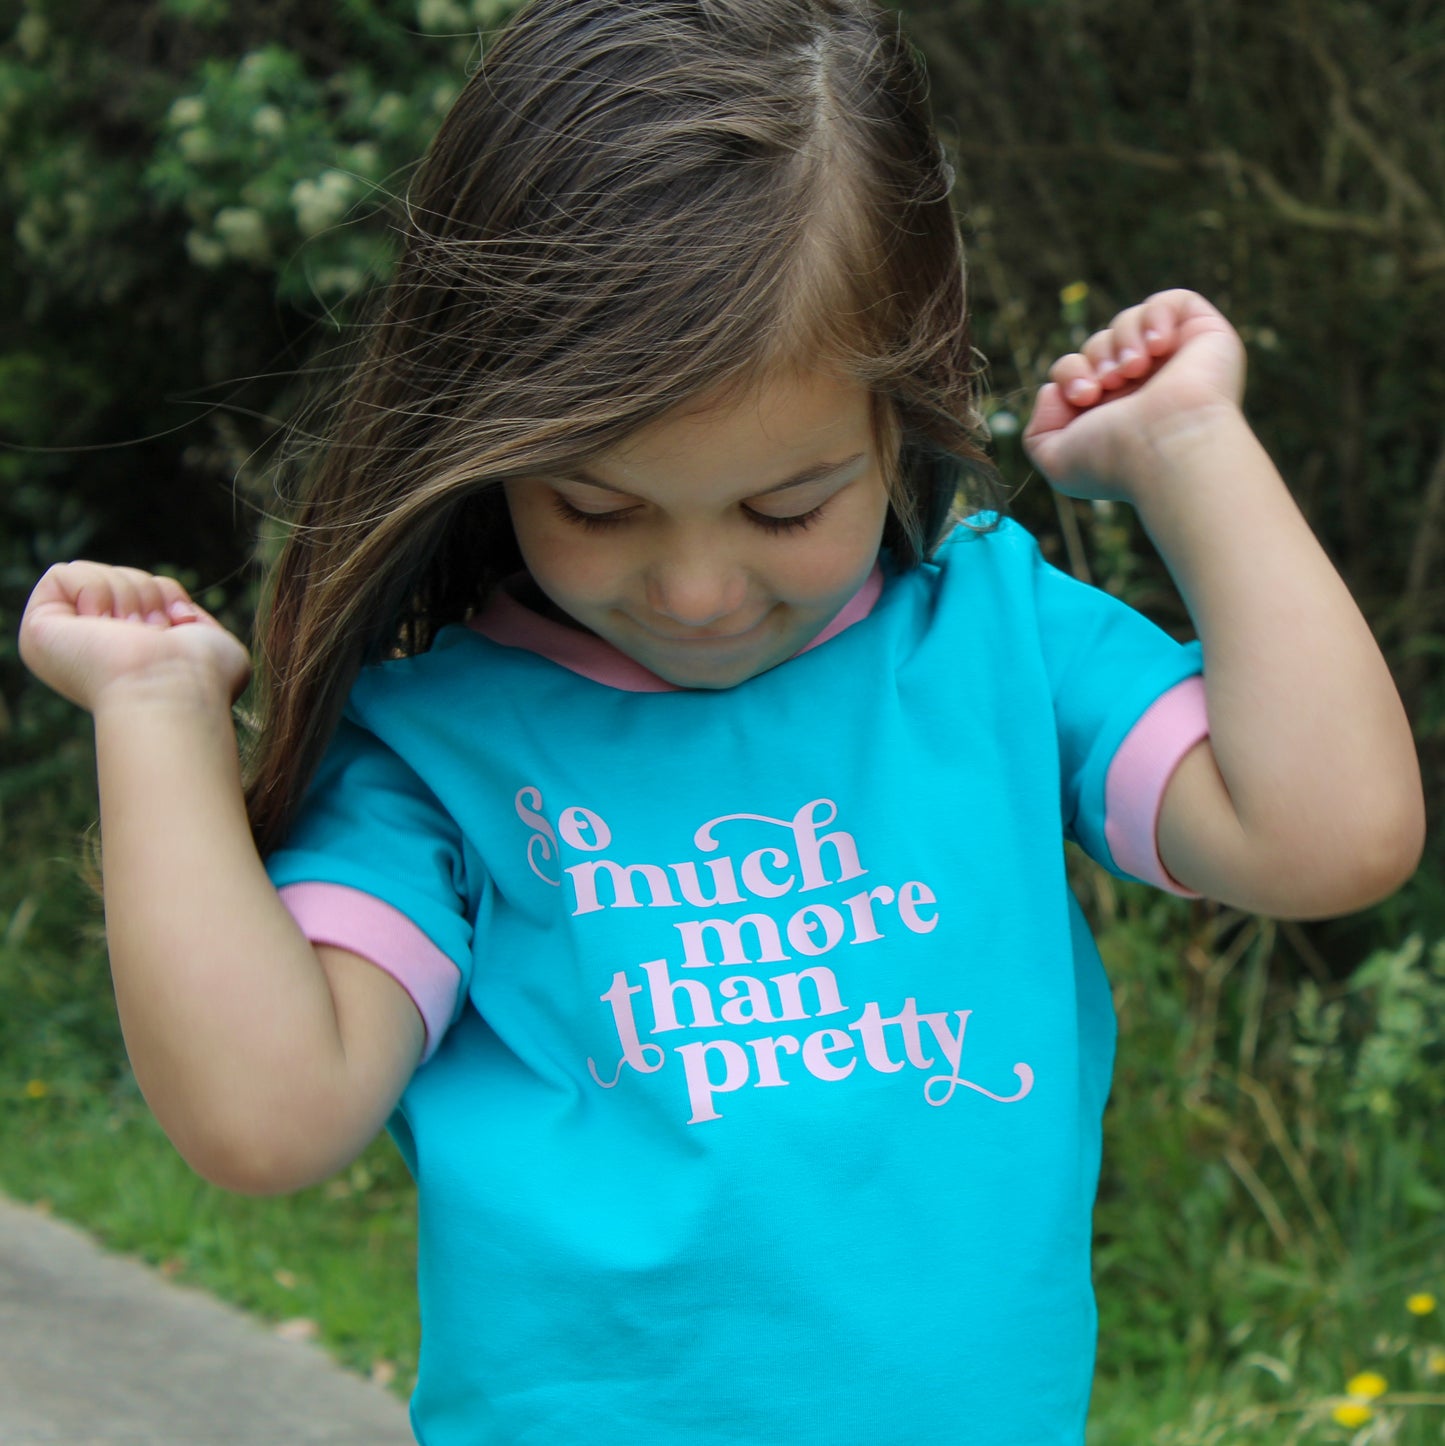 So Much More Than Pretty Ringer Tee - Pre Order